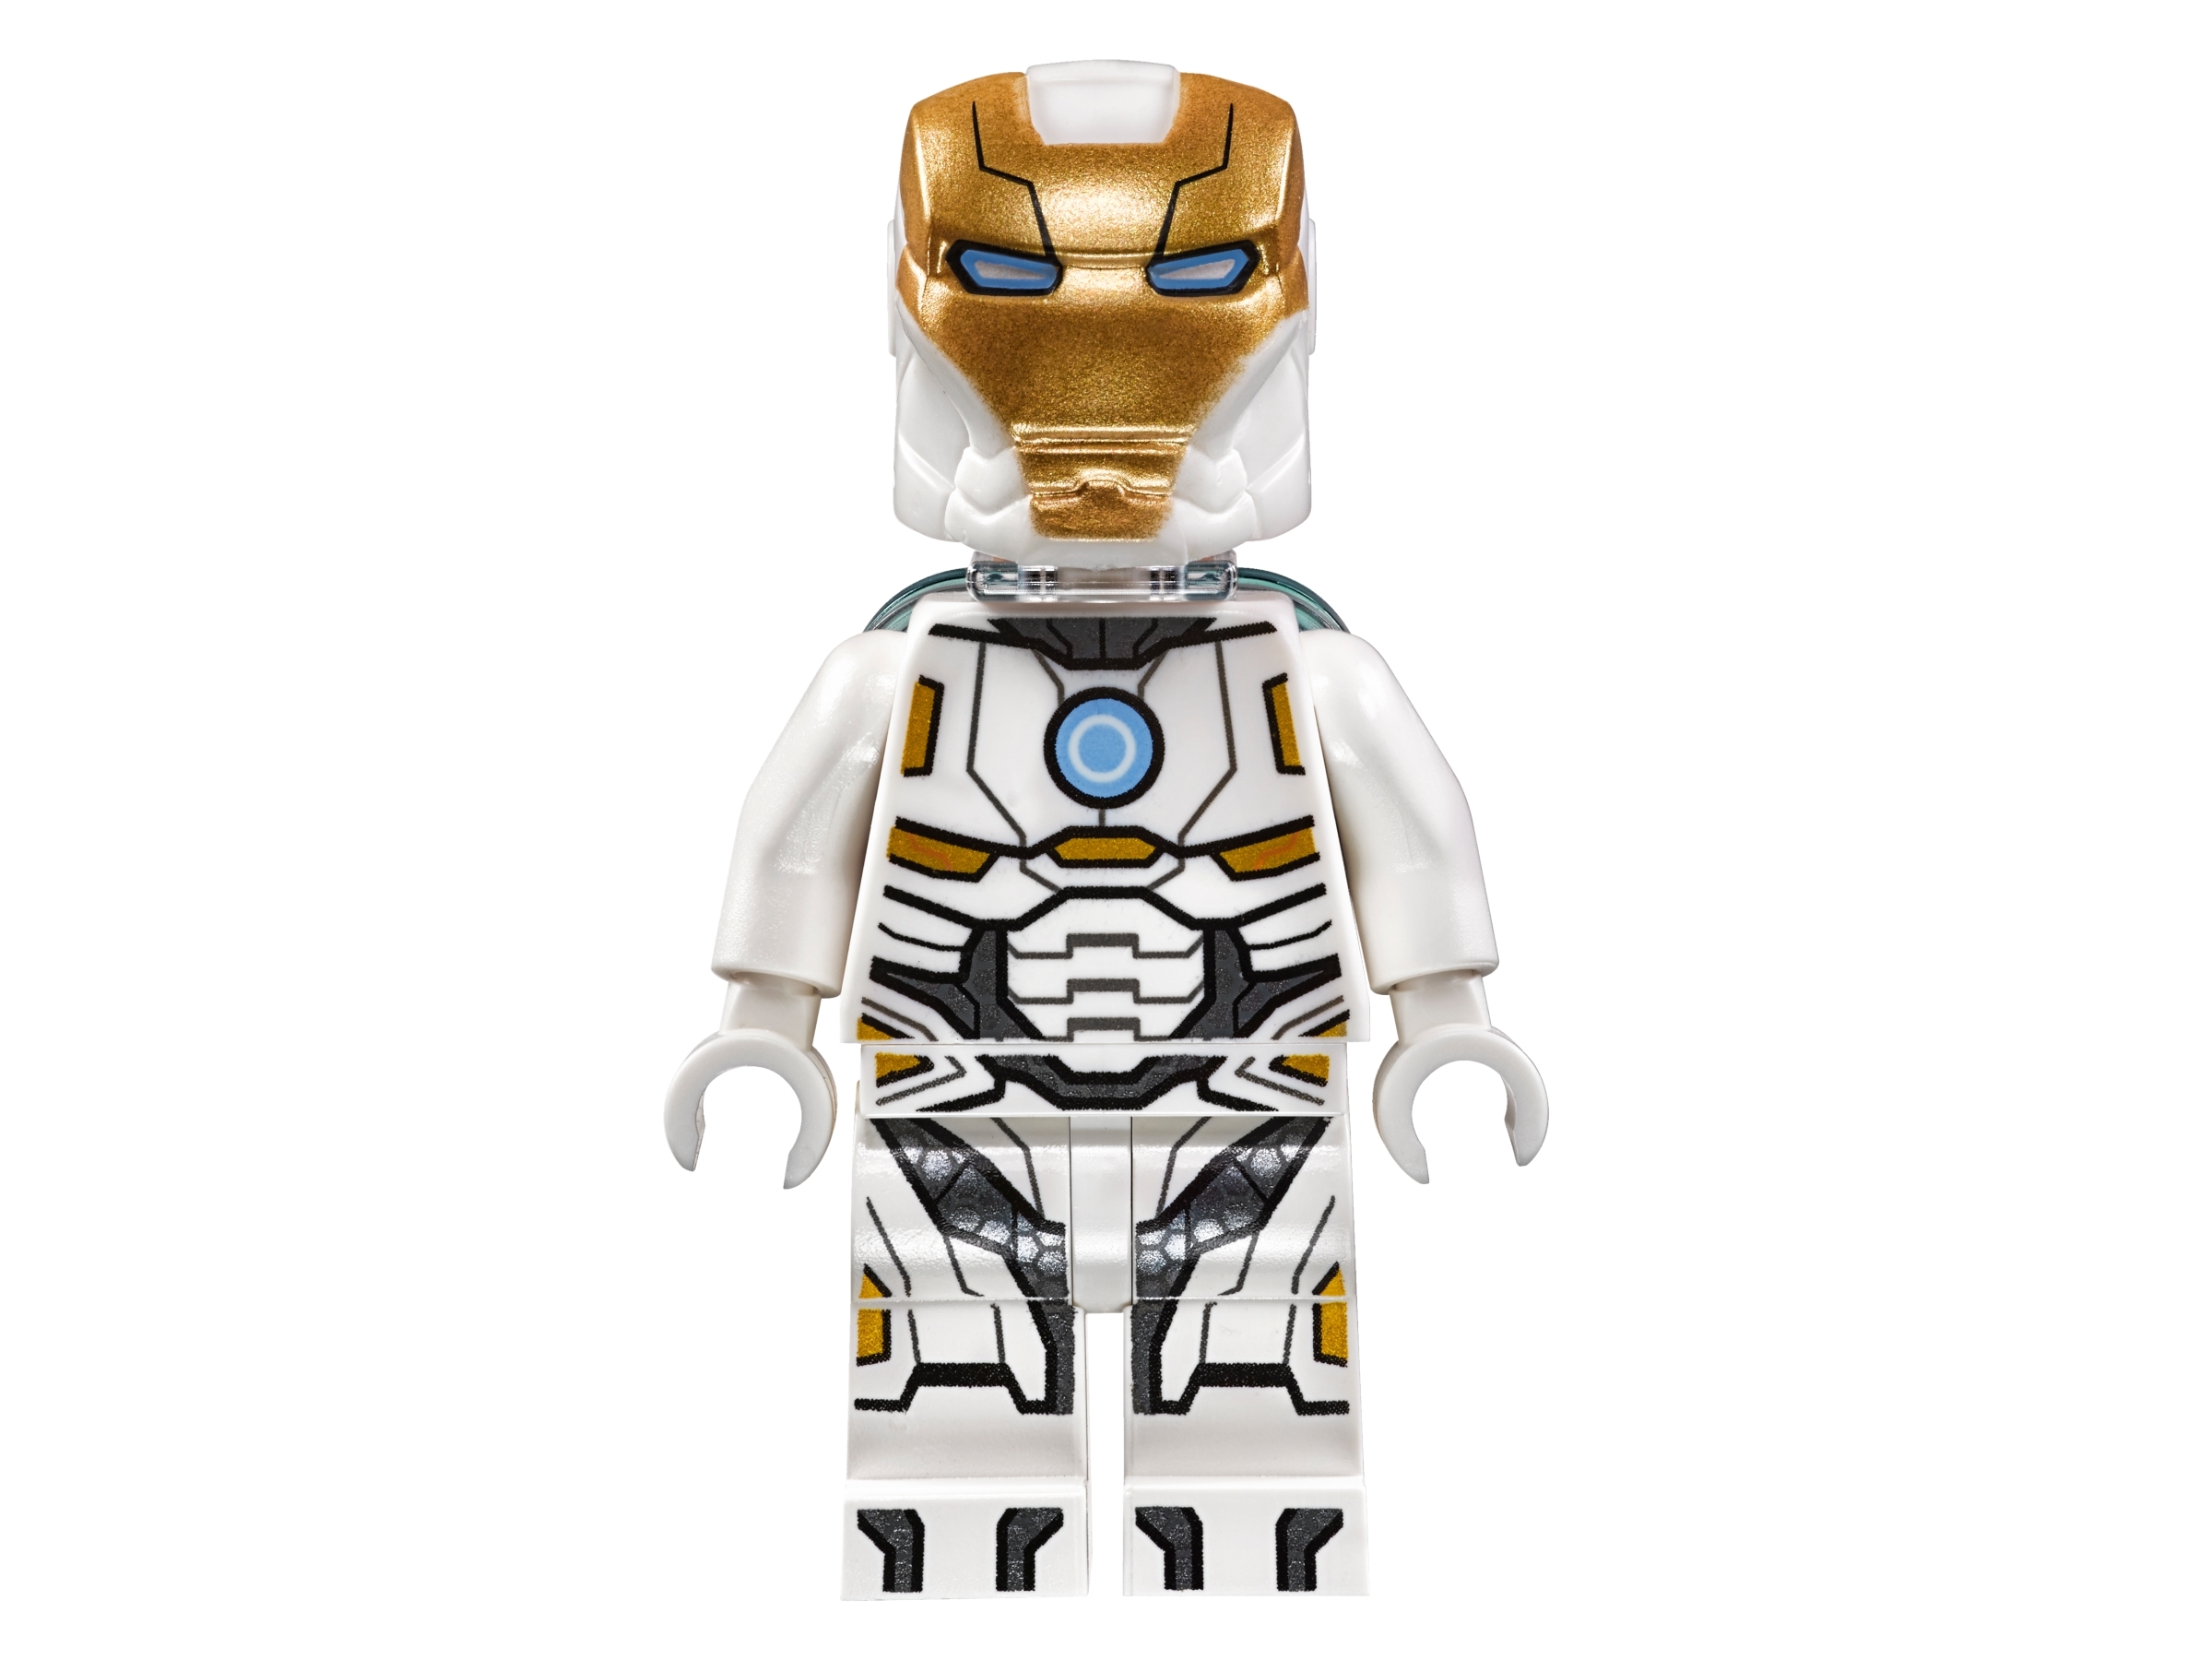 NEW LEGO SPACE IRON MAN FROM SET 76049 AVENGERS sh229 